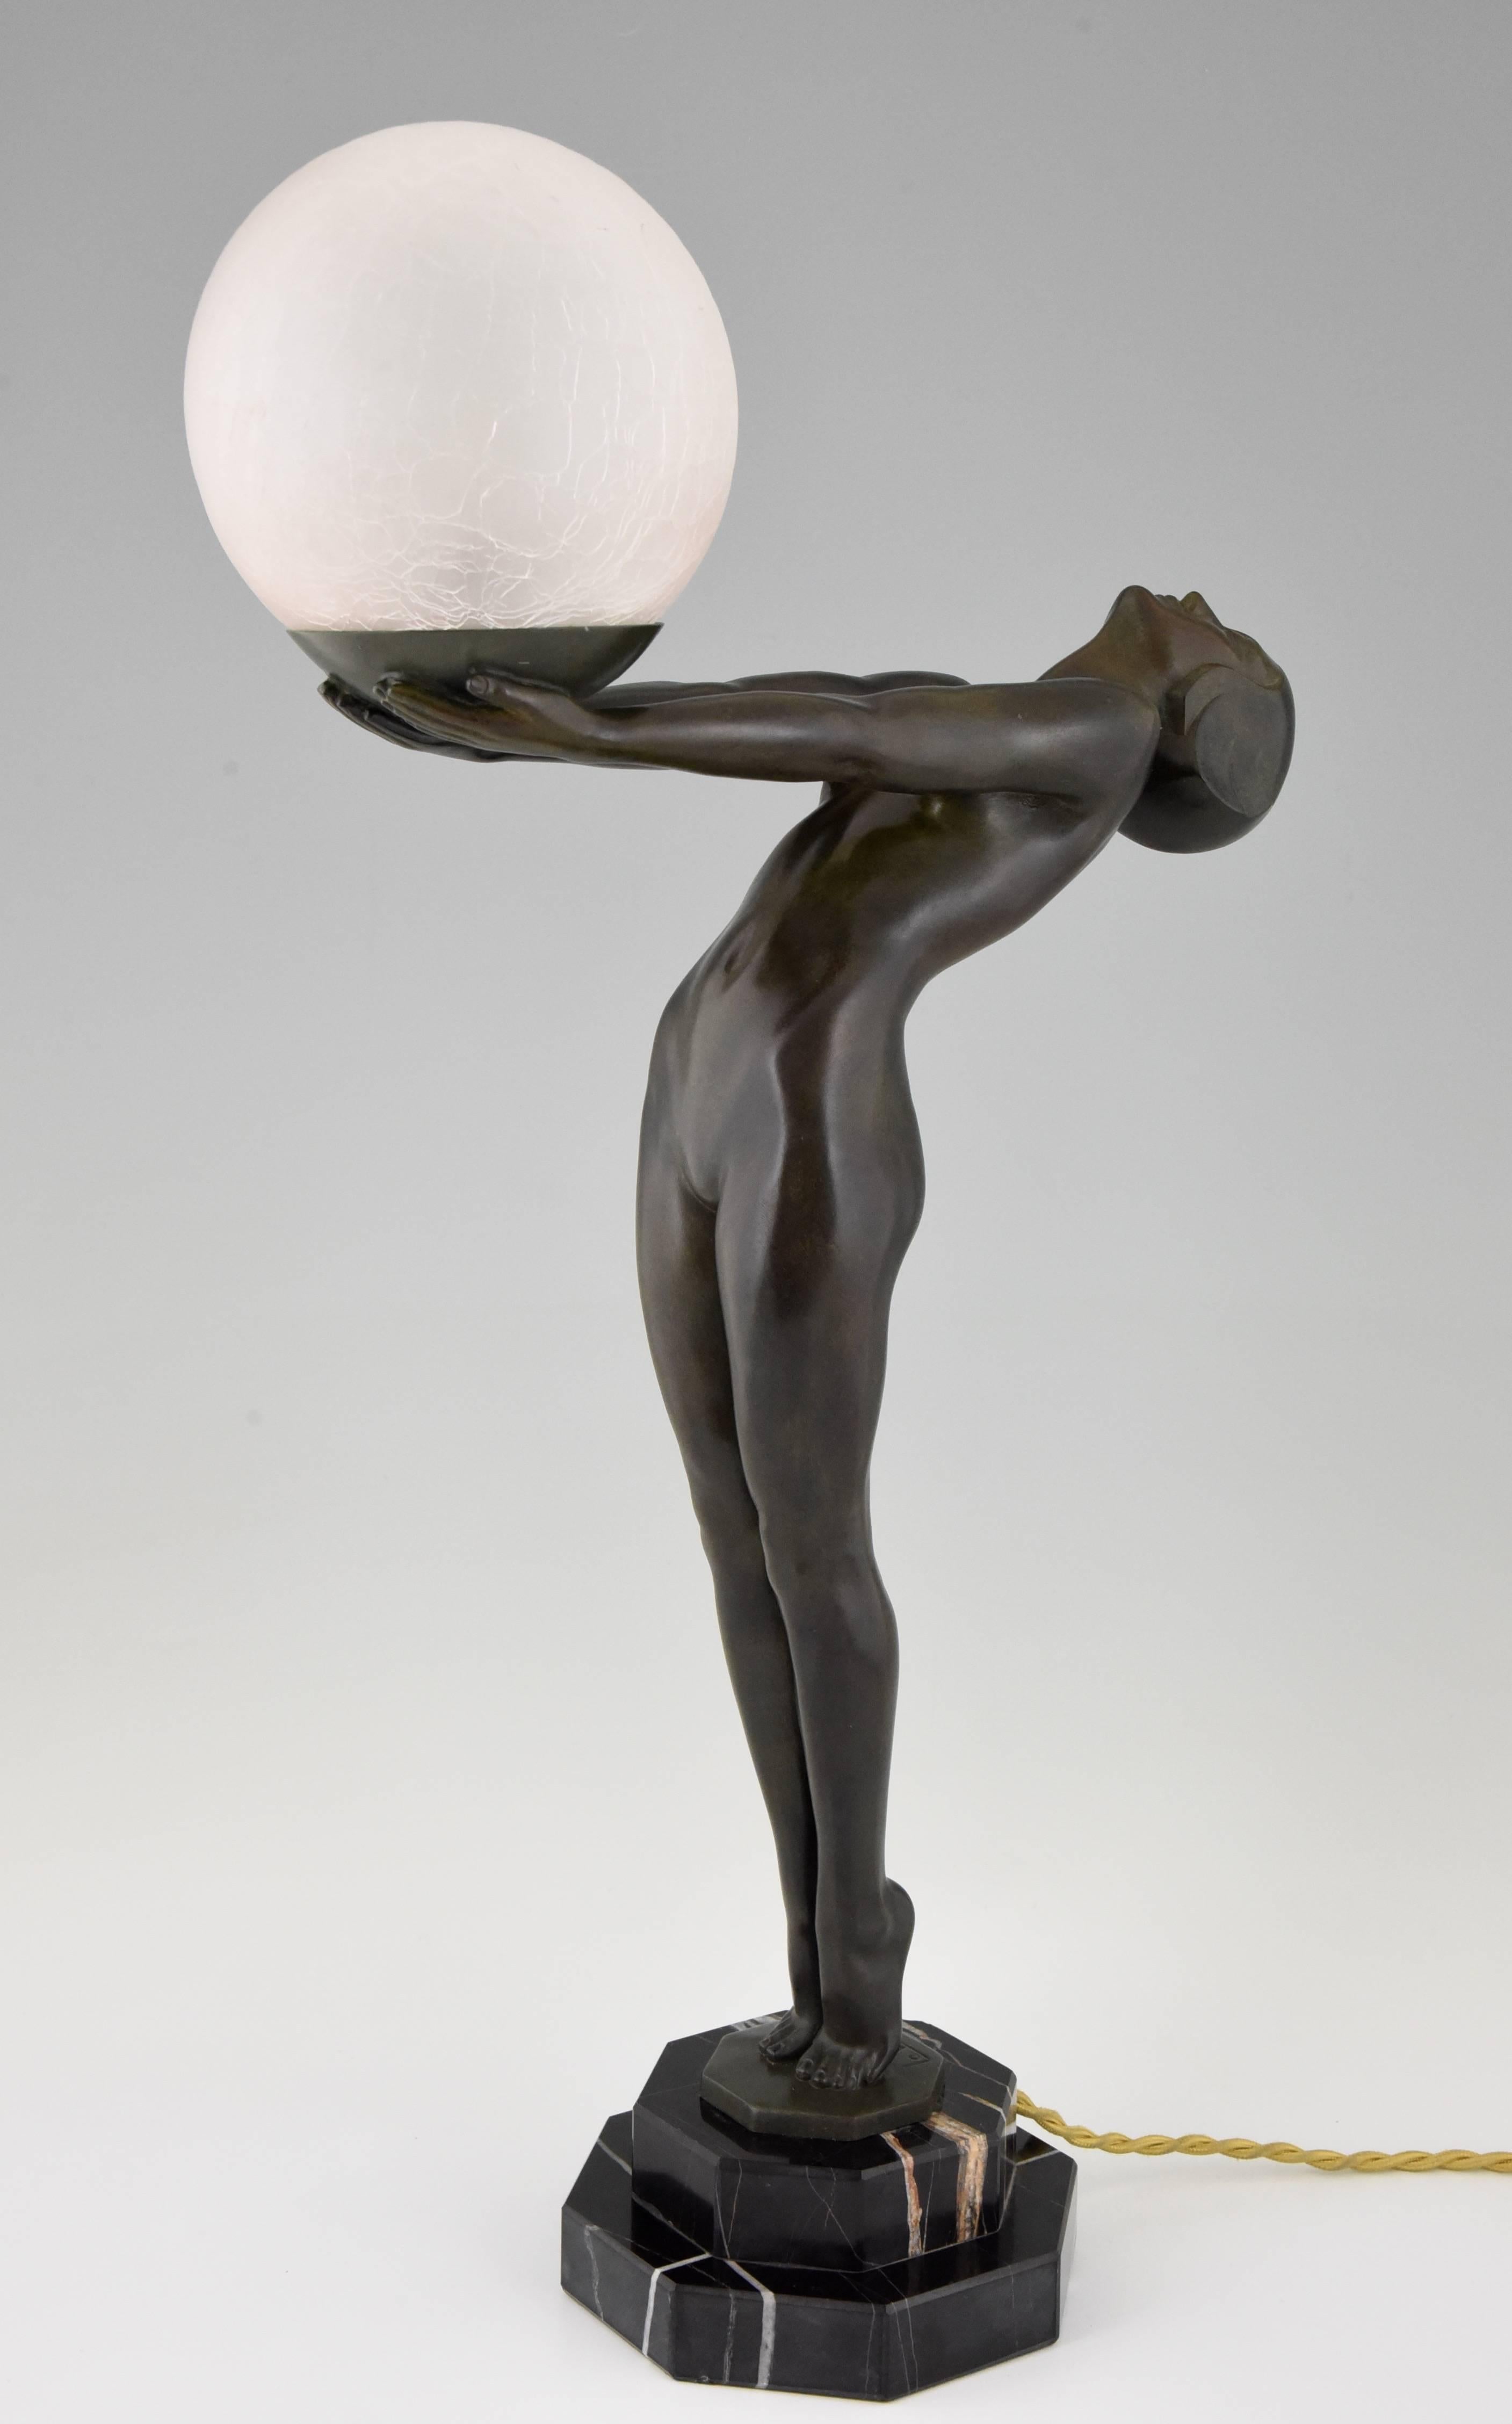 20th Century French Art Deco Lamp, Nude with Ball by Max Le Verrier, 1930